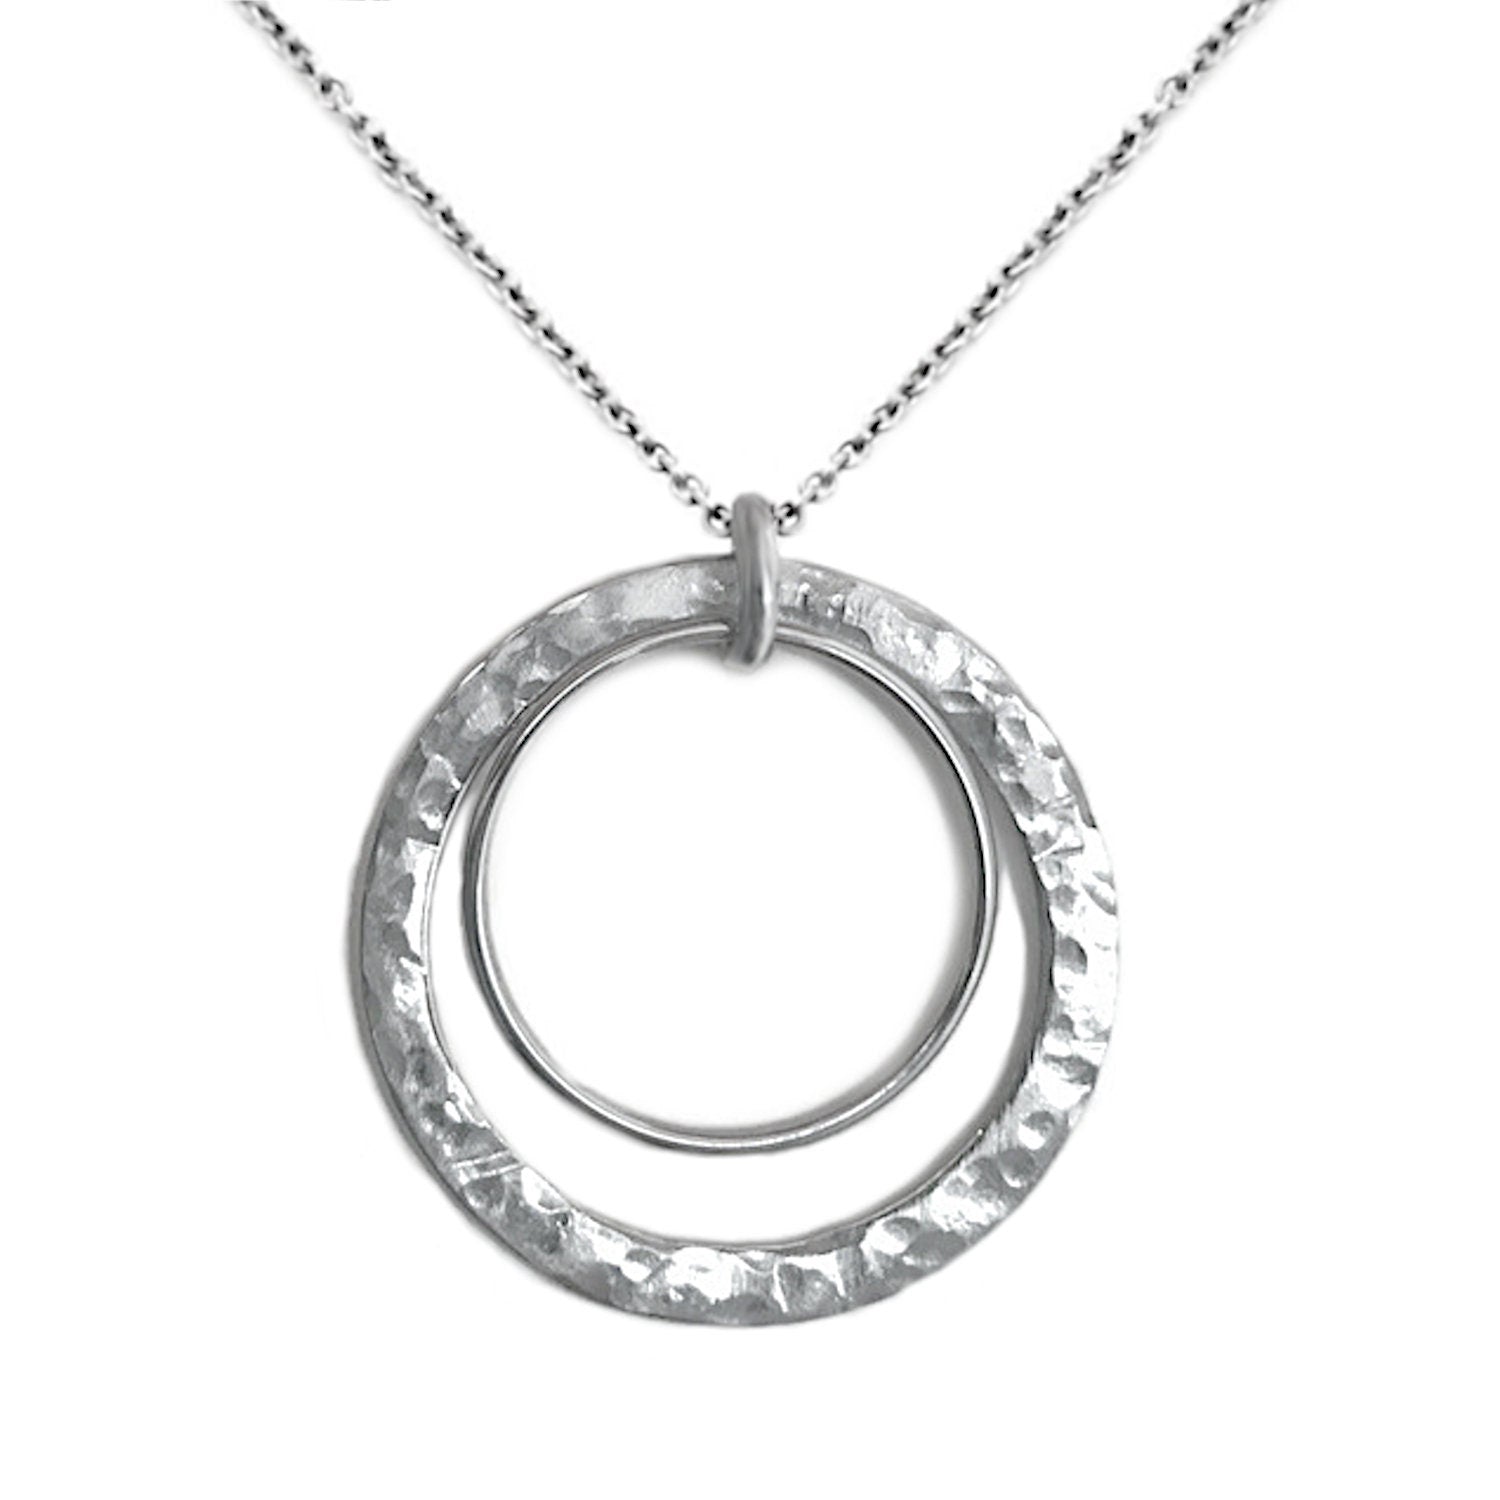 Silver Hammered Circle Necklace, 2 Two Circle Necklace, Gift for Sister, Non Tarnish, Stainless Steel Jewelry for Women, Round Pendant